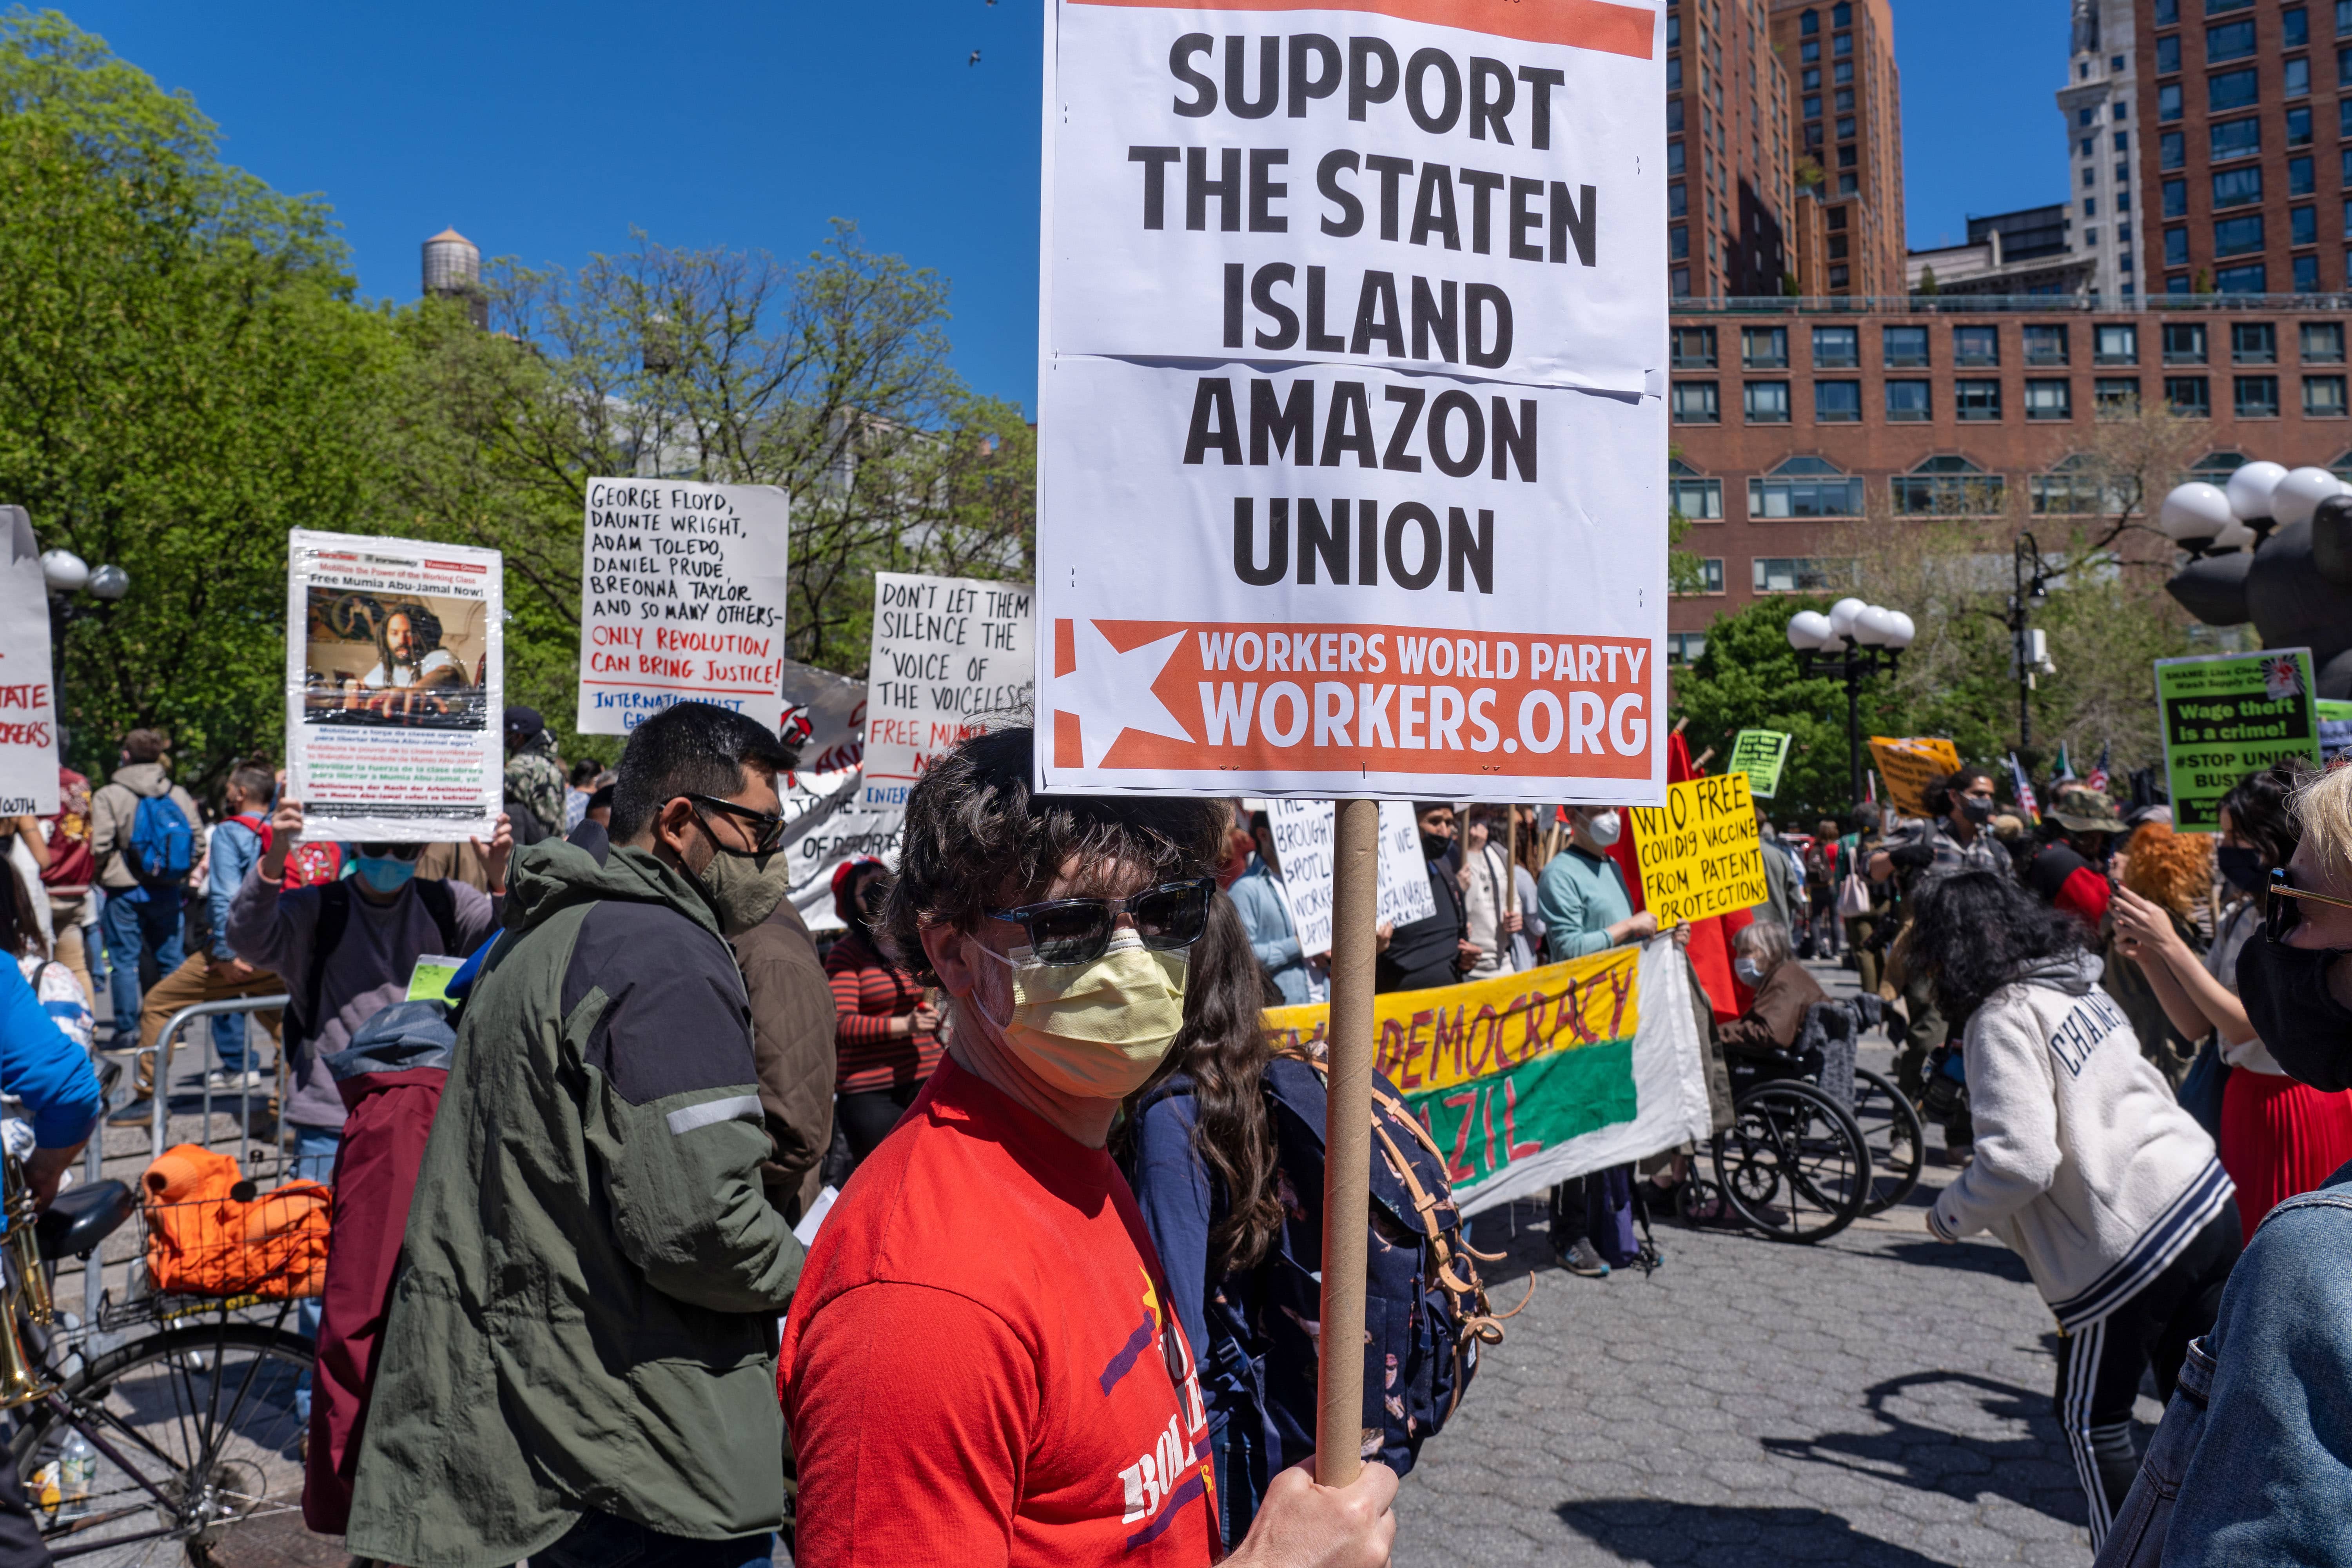 may-day-protest-held-in-new-york-us-01-may-2021-2